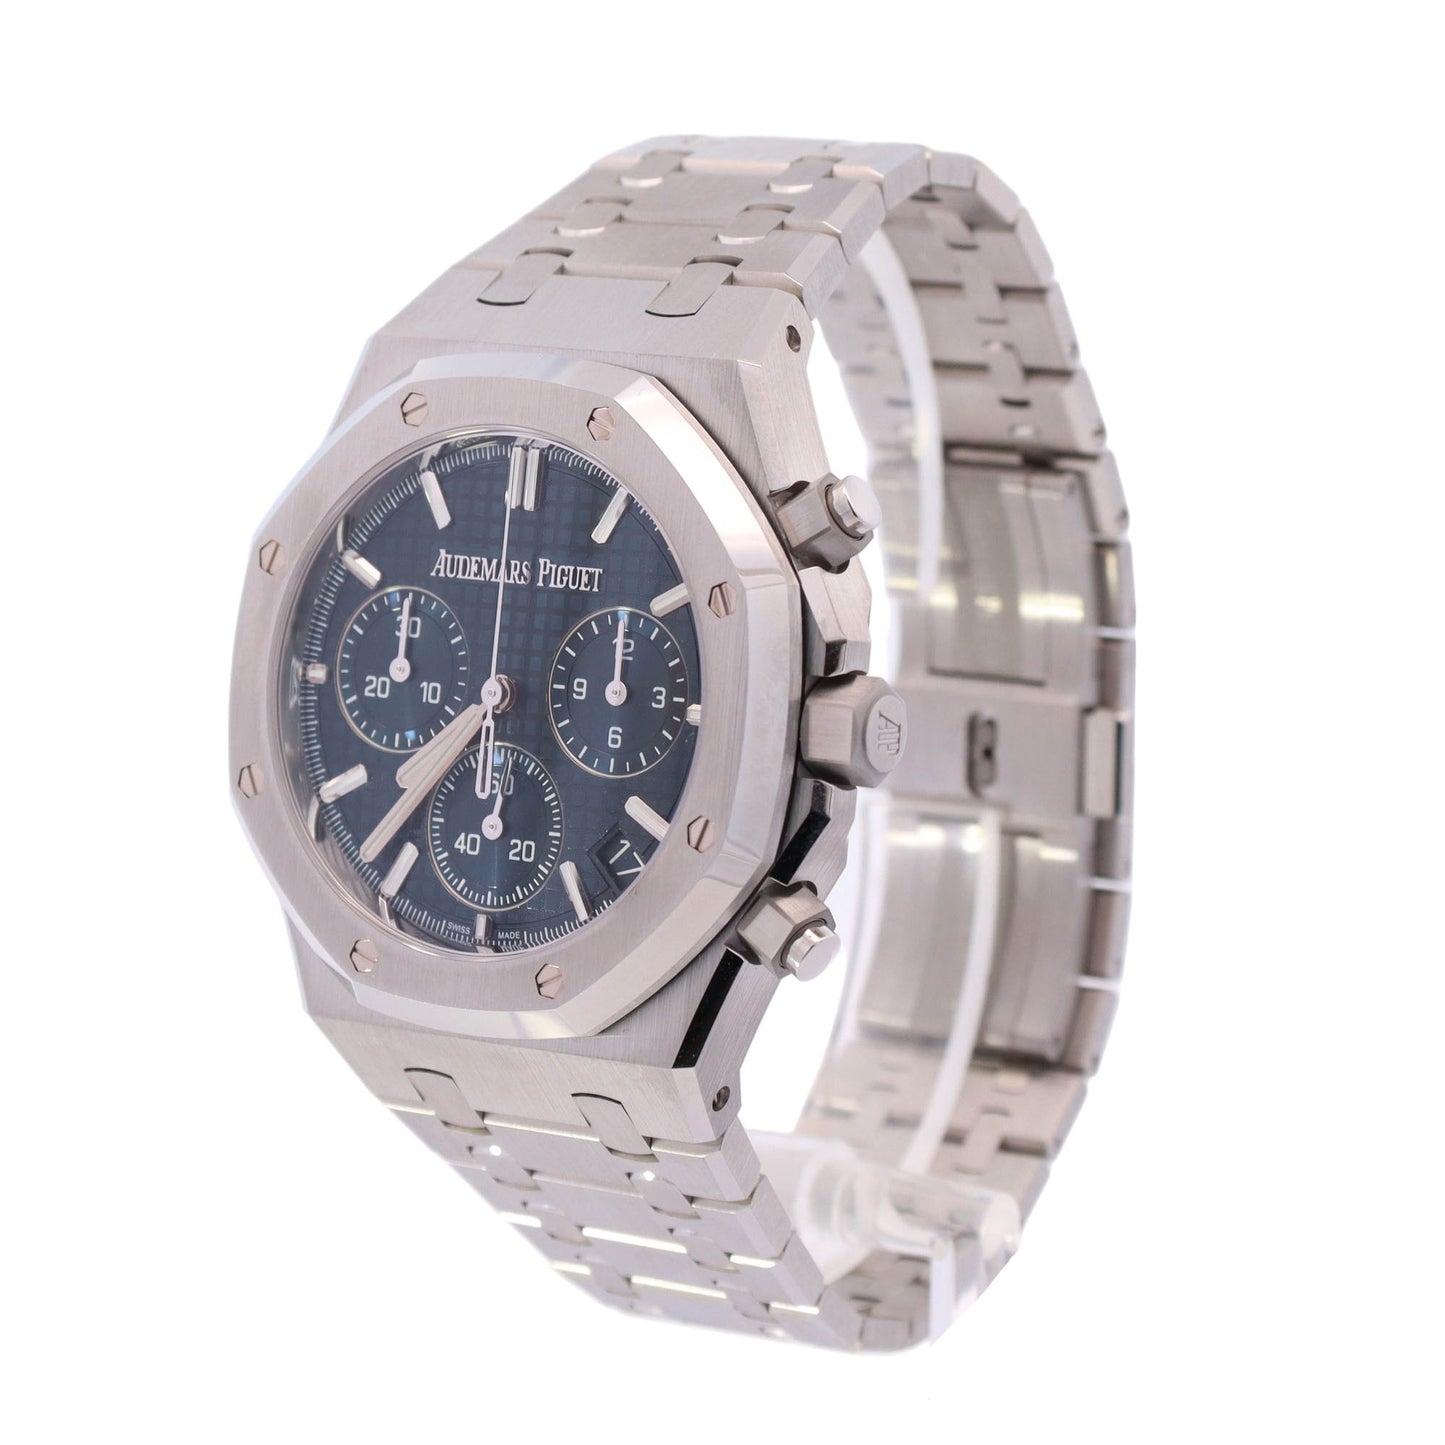 Audemars Piguet Royal Oak Stainless Steel 42mm Blue Chronograph Dial Watch Reference# 26240ST - Happy Jewelers Fine Jewelry Lifetime Warranty